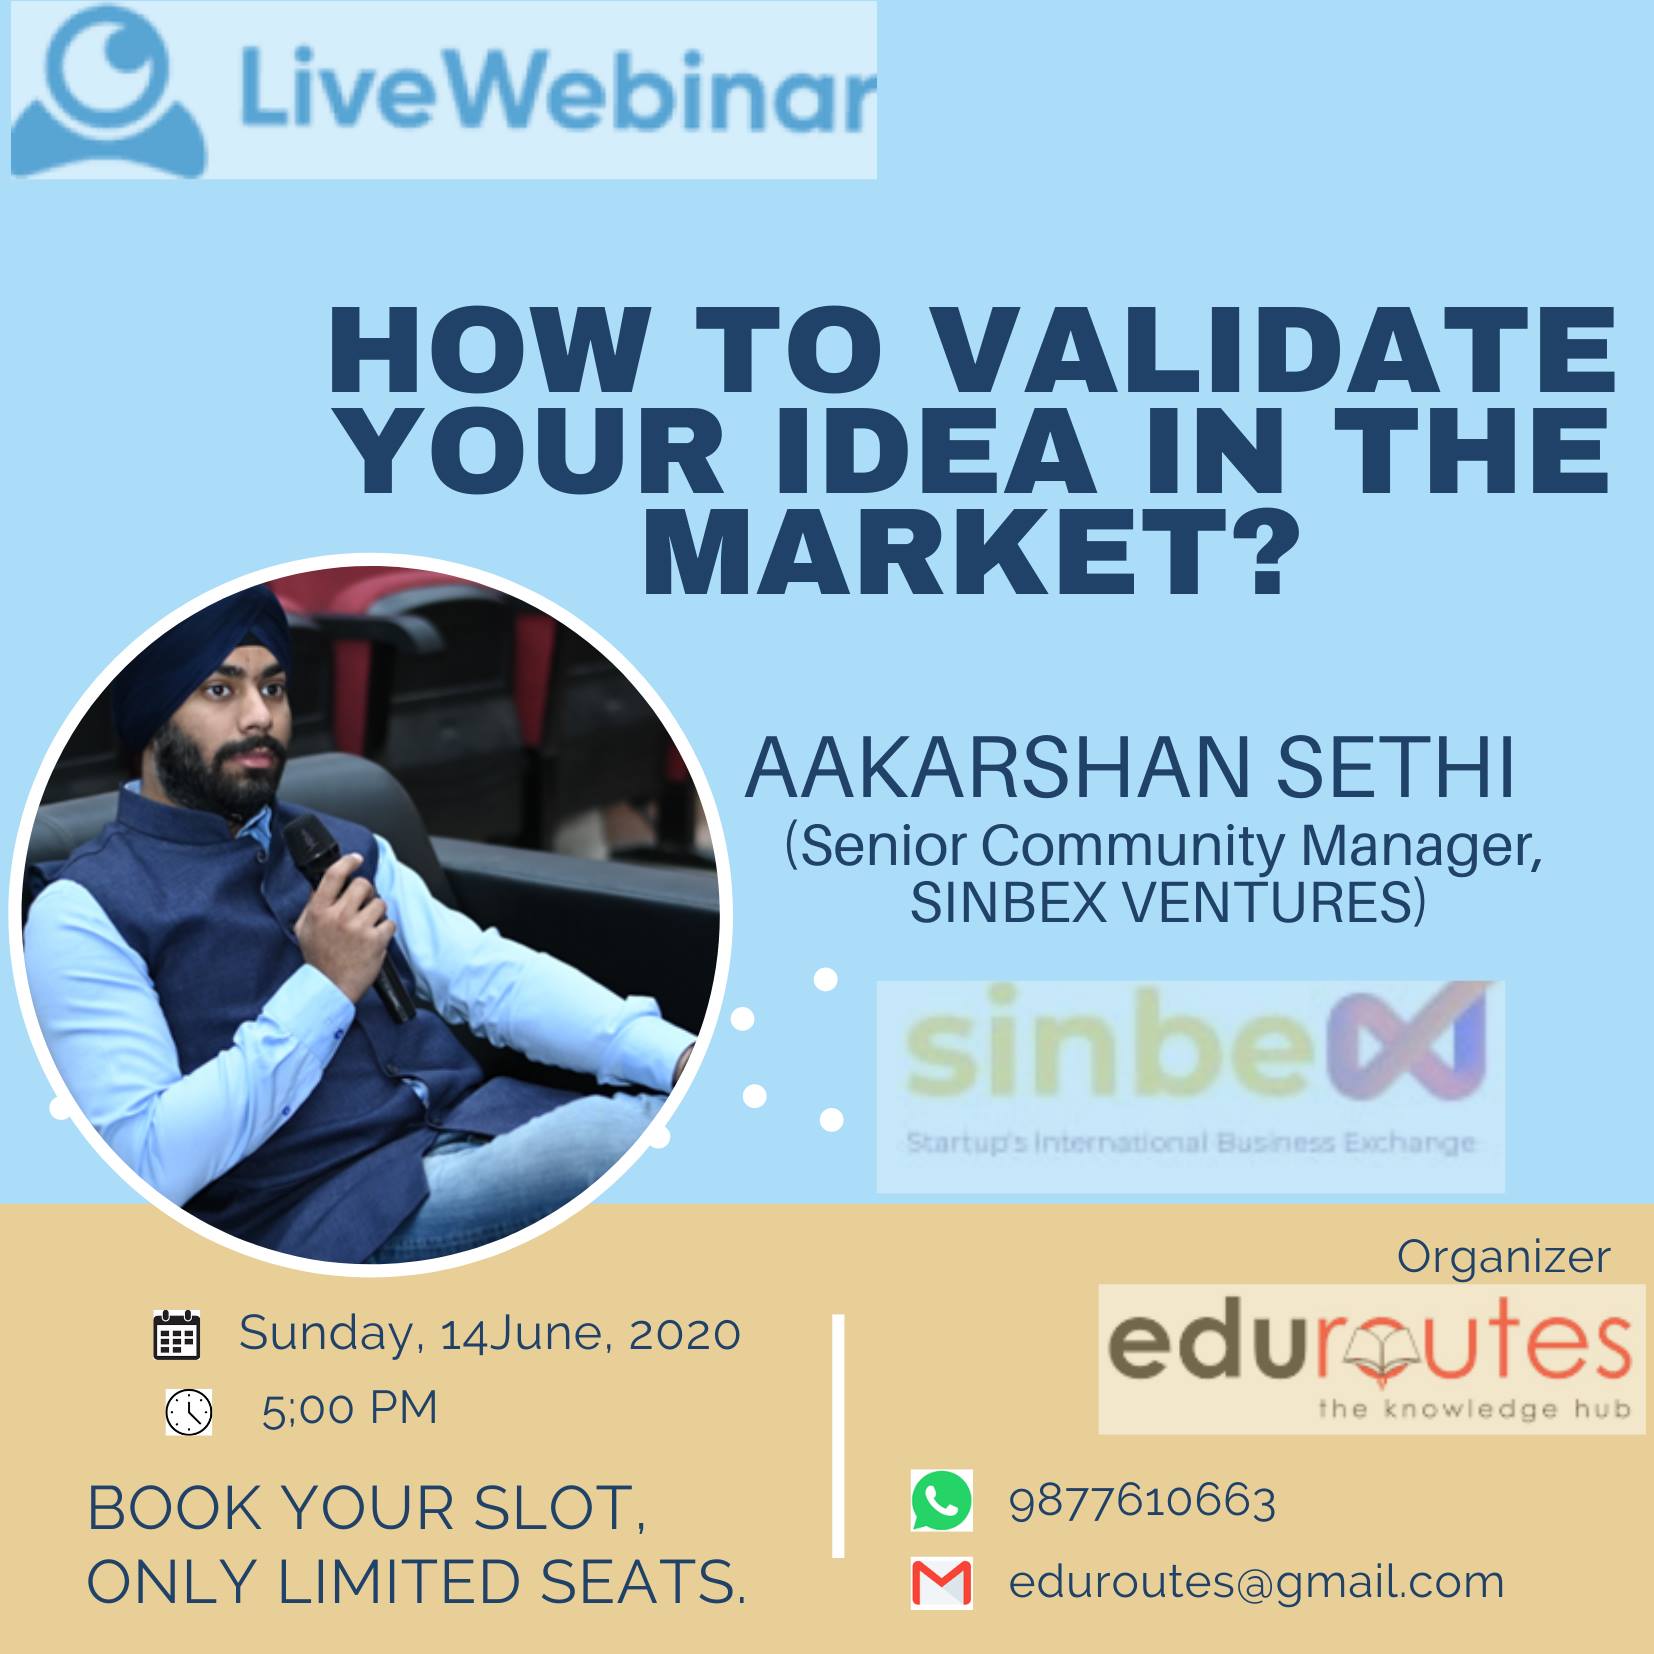 How To Validate Your Idea In The Market?